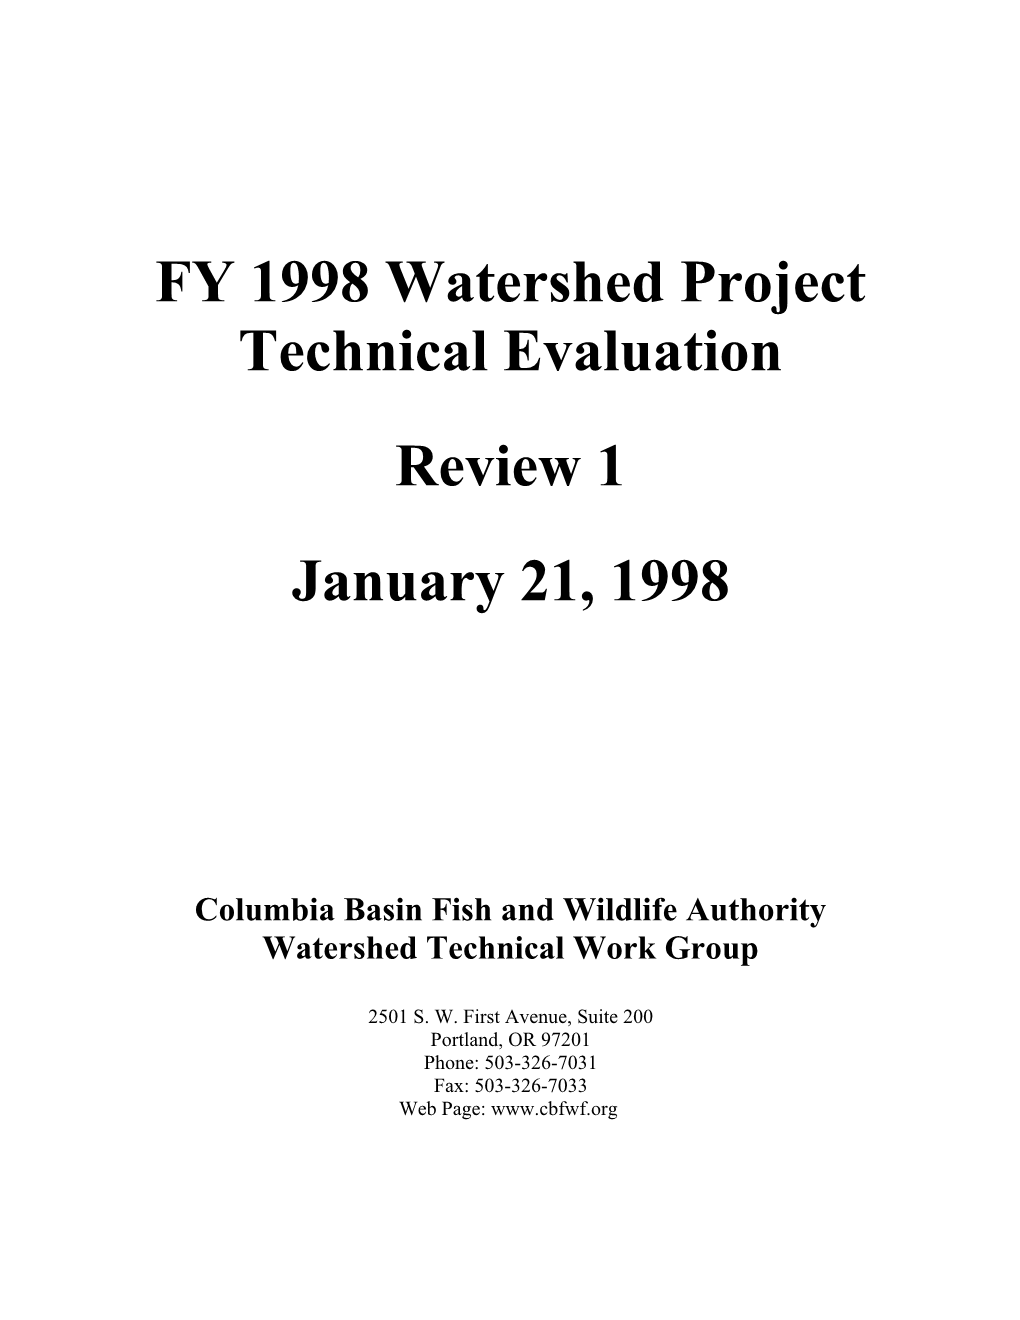 FY 1999 Watershed Project Technical Evaluation